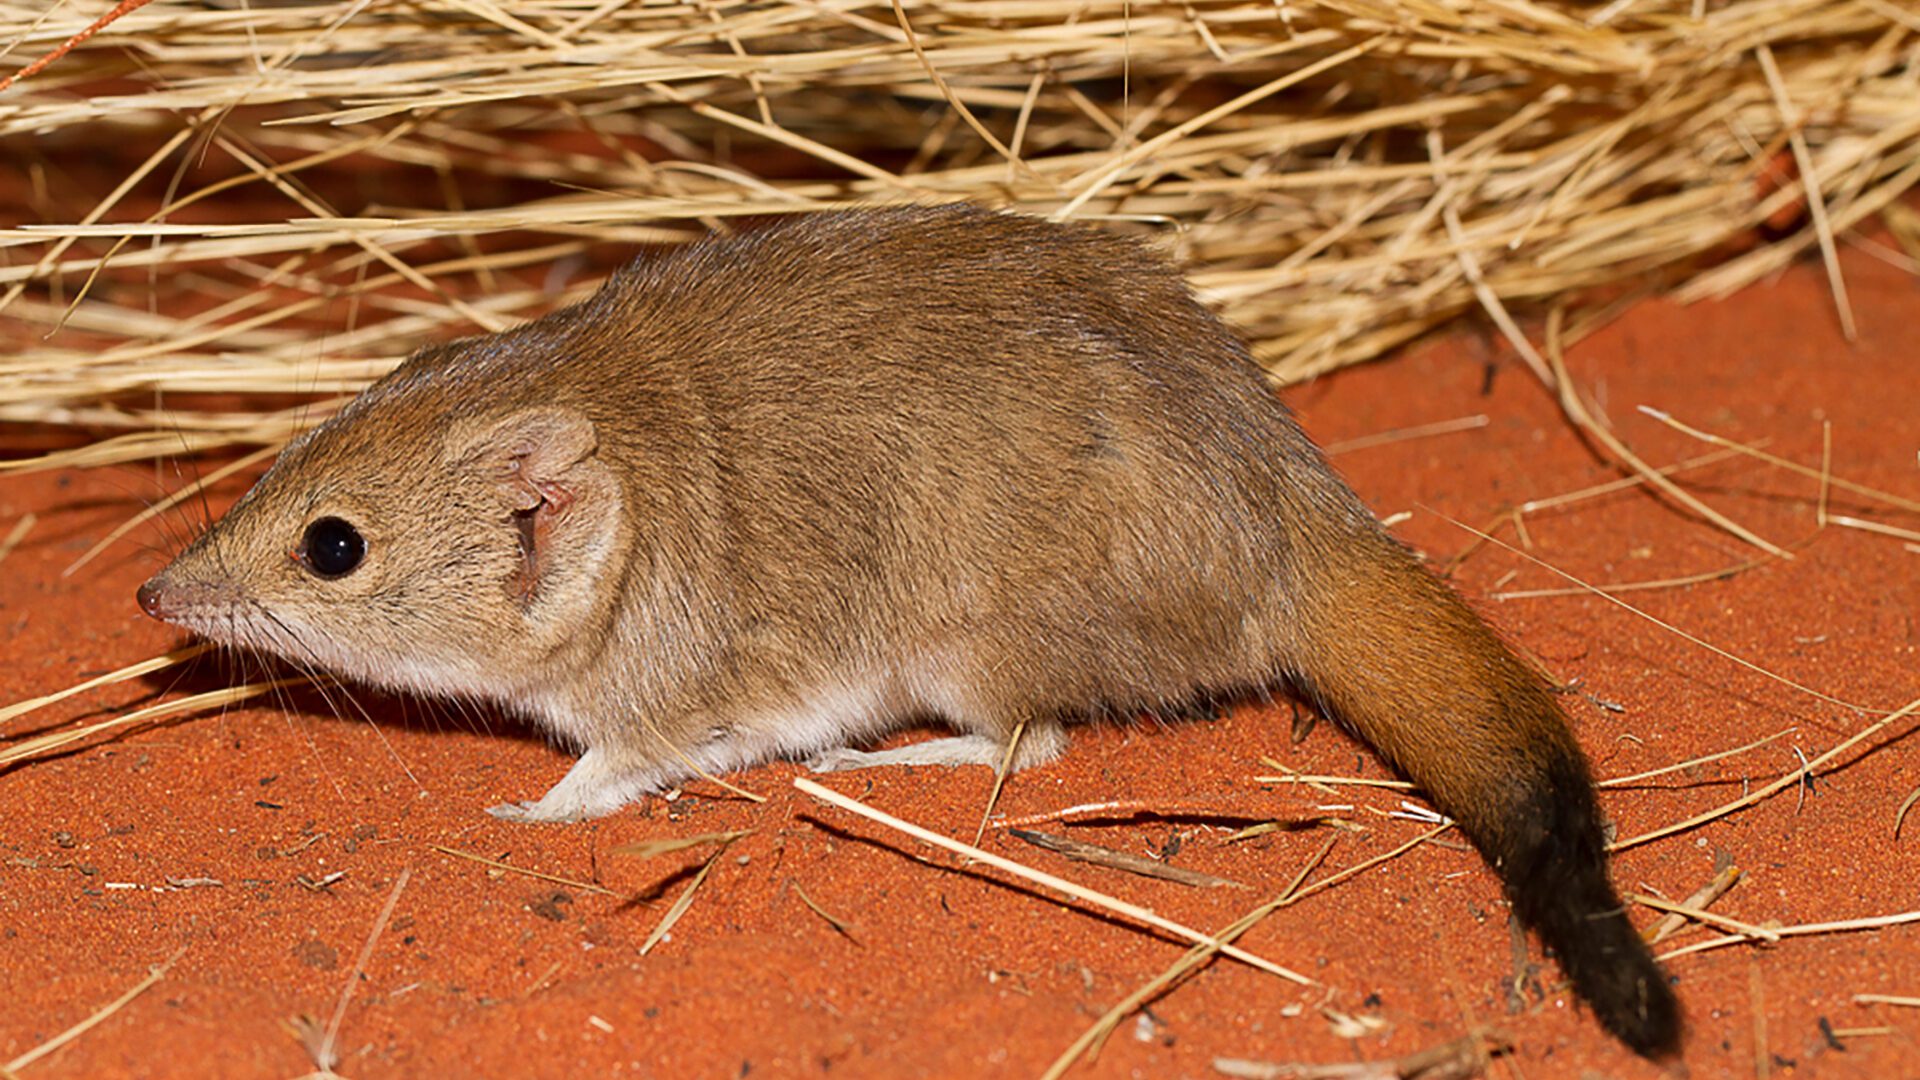 Research reveals three new marsupial species – though all likely extinct